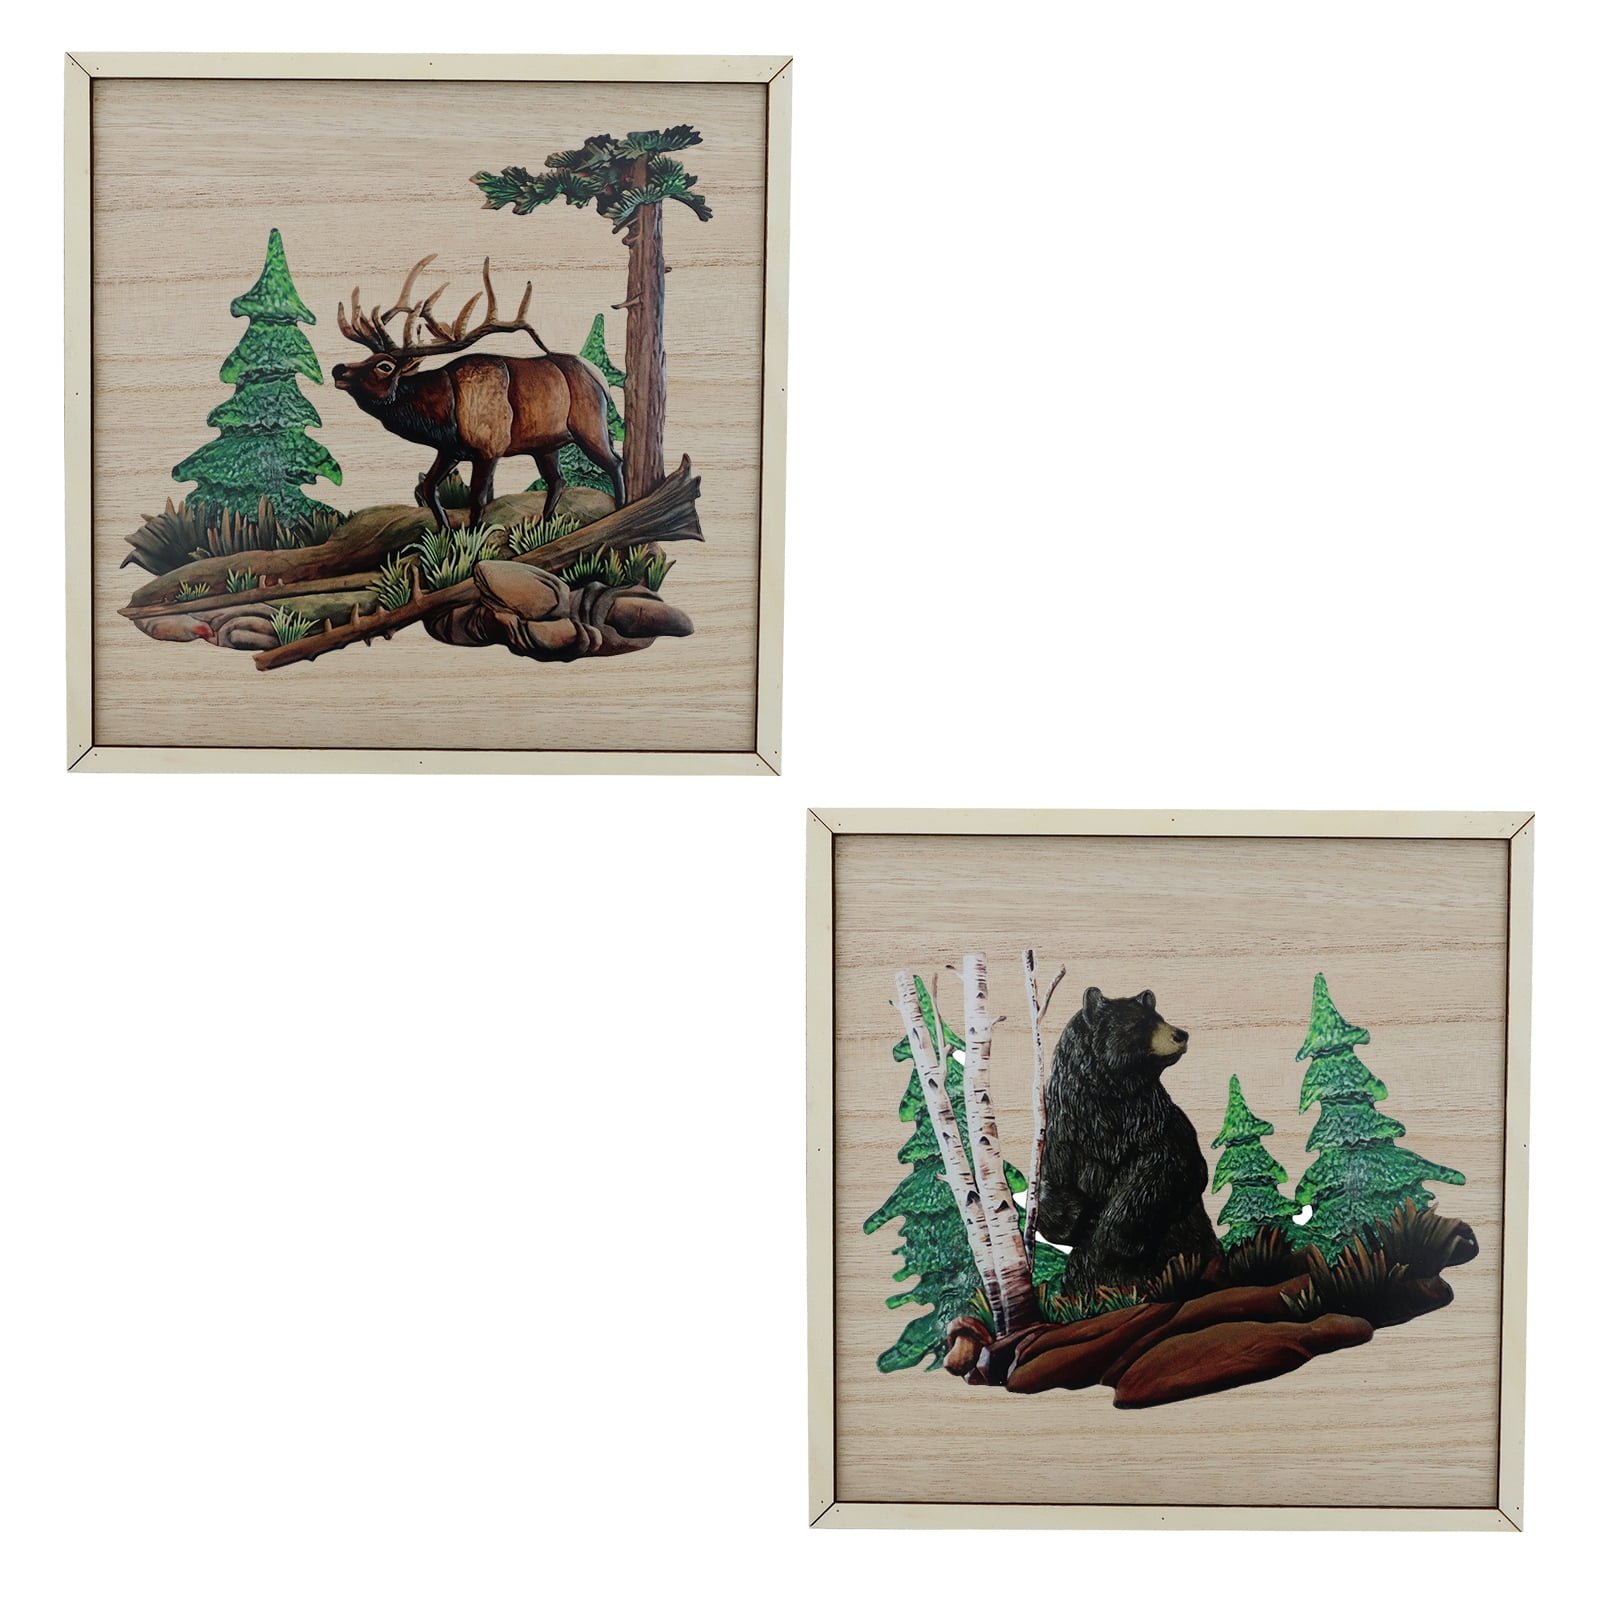  Solucky Metal Wall Fishing Wall Decor,Hanging Scene Metal Wall  Art For Indoor,Outdoor Animal Artwork Rustic,Home Office Cabin Farmhouse  Decorations (B) : Home & Kitchen